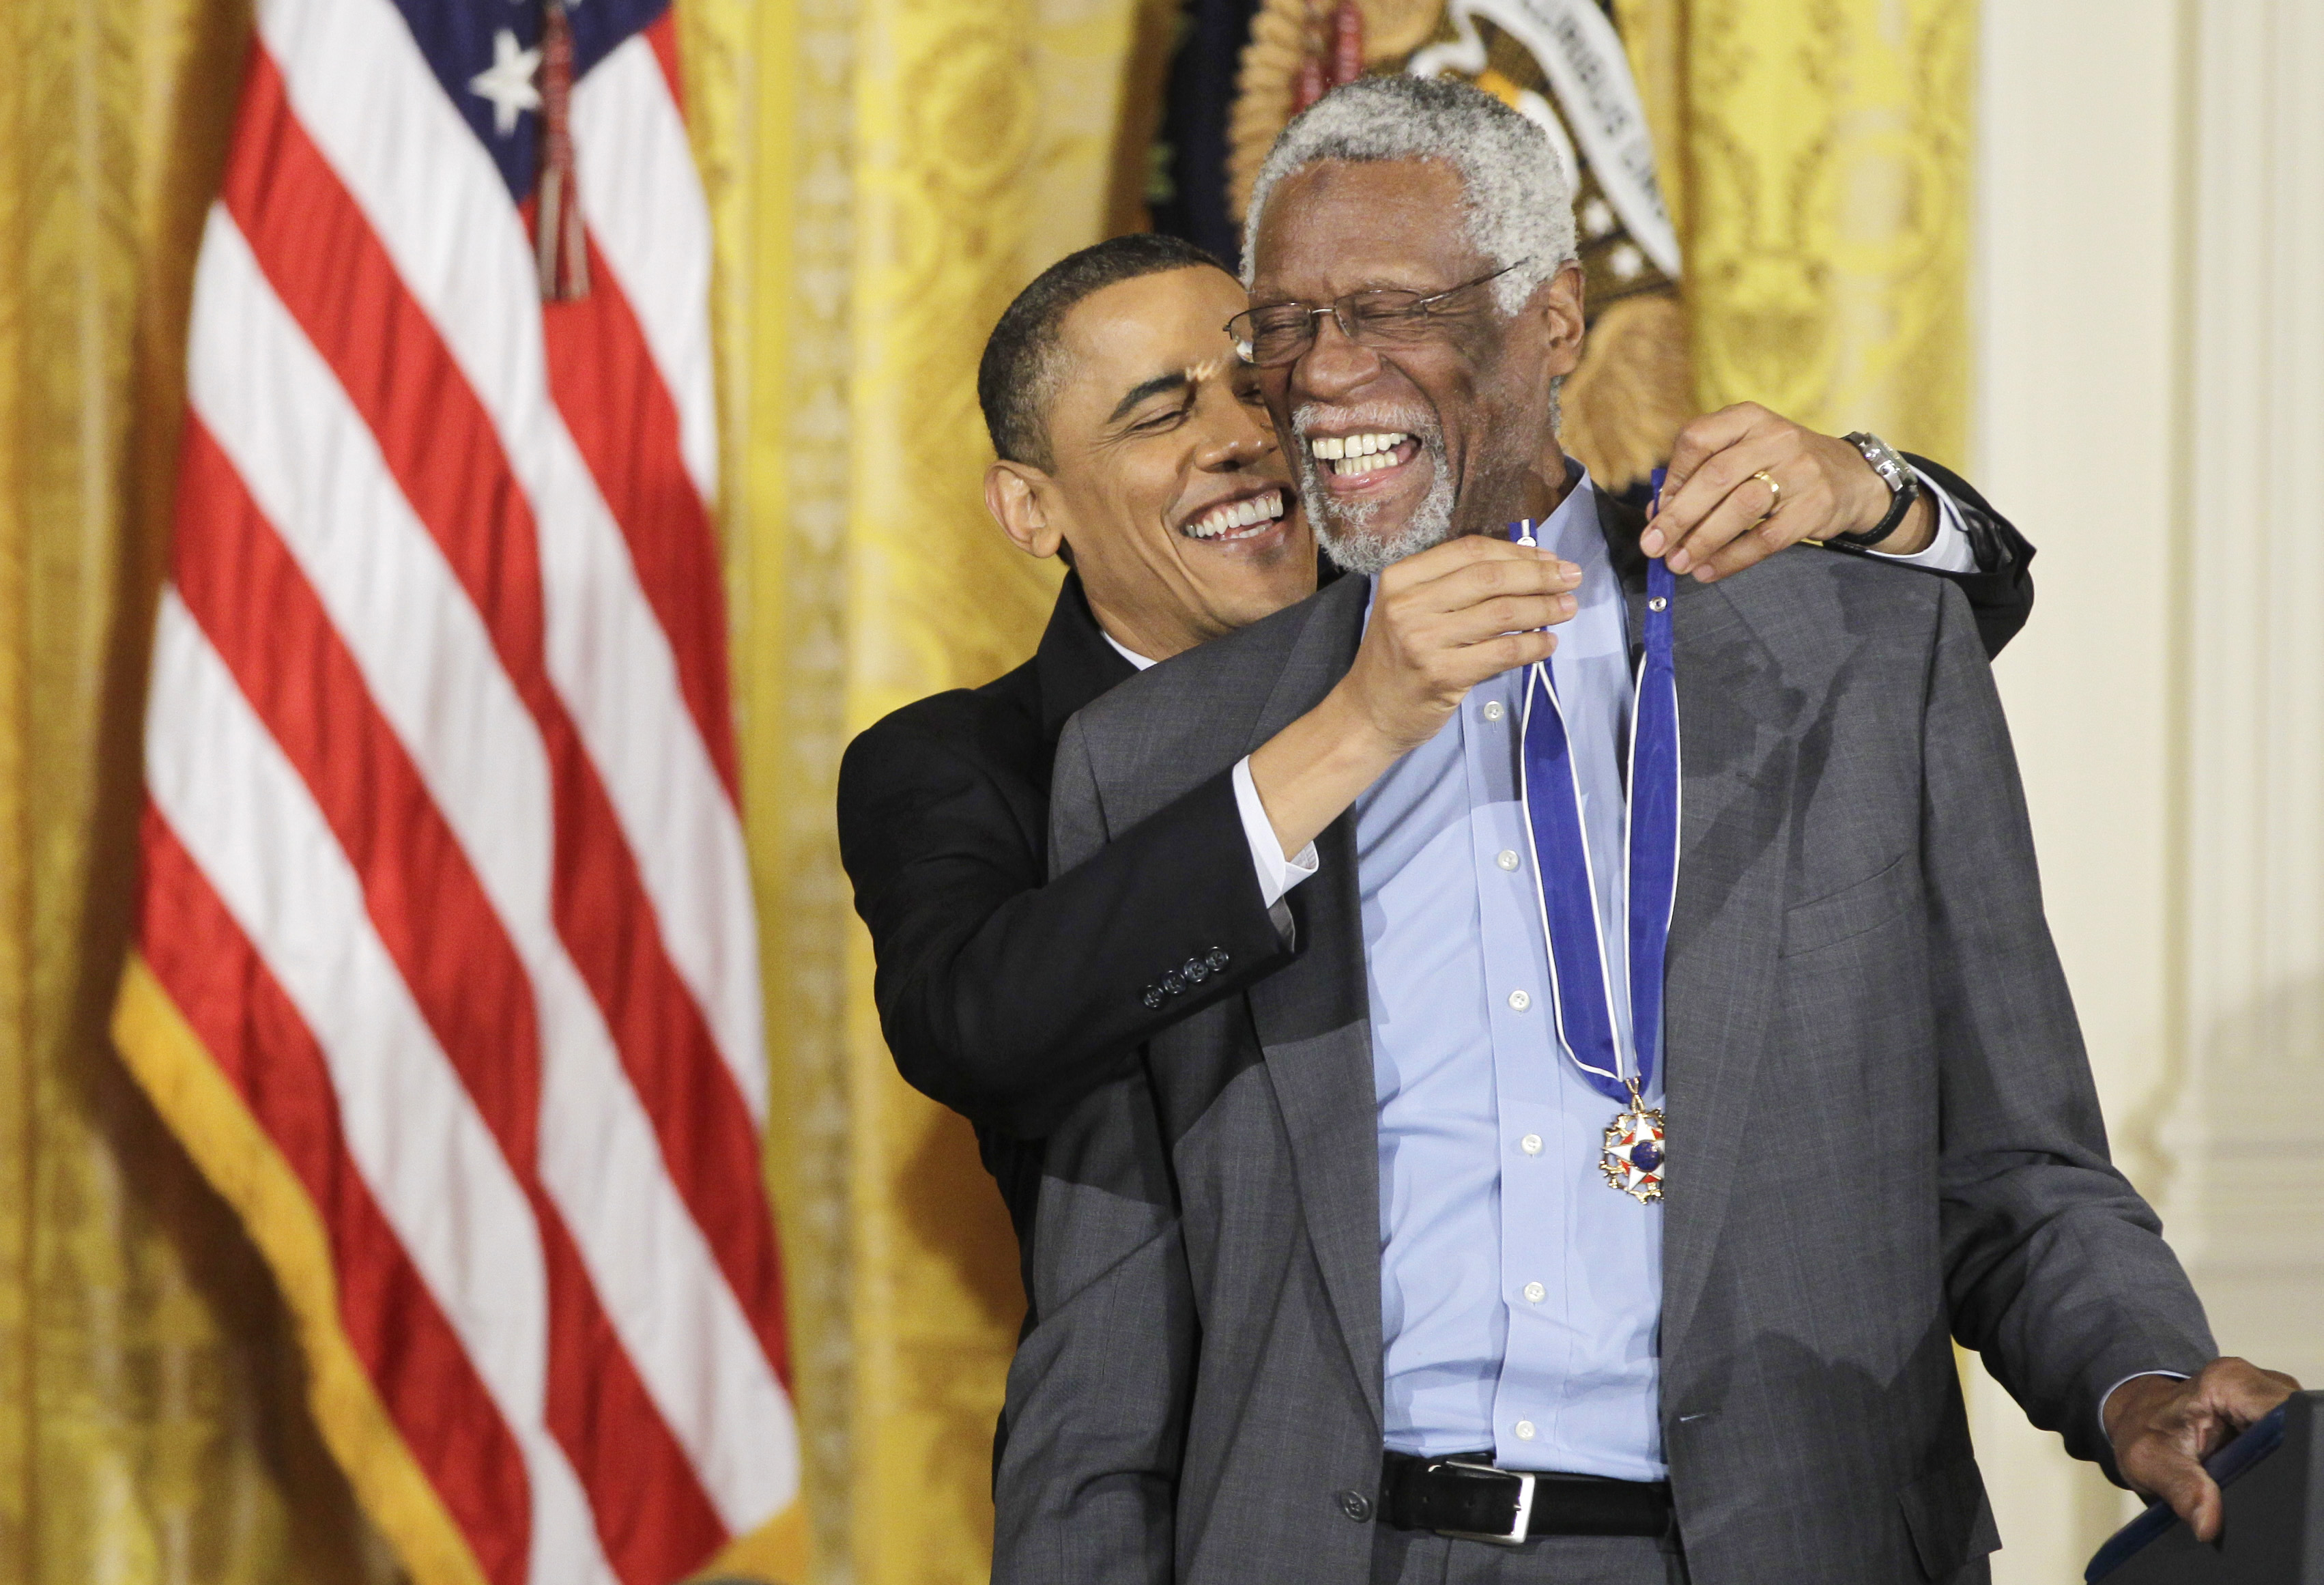 President Barack Obama reaches up to present a 2010 Presidential Medal of Freedom to basketball hall of fame member, former Boston Celtics coach and captain Bill Russell, Tuesday, Feb. 15, 2011, during a ceremony in the East Room of the White House in Washington. cr: Charles Dharapak/AP Images/Courtesy of Netflix